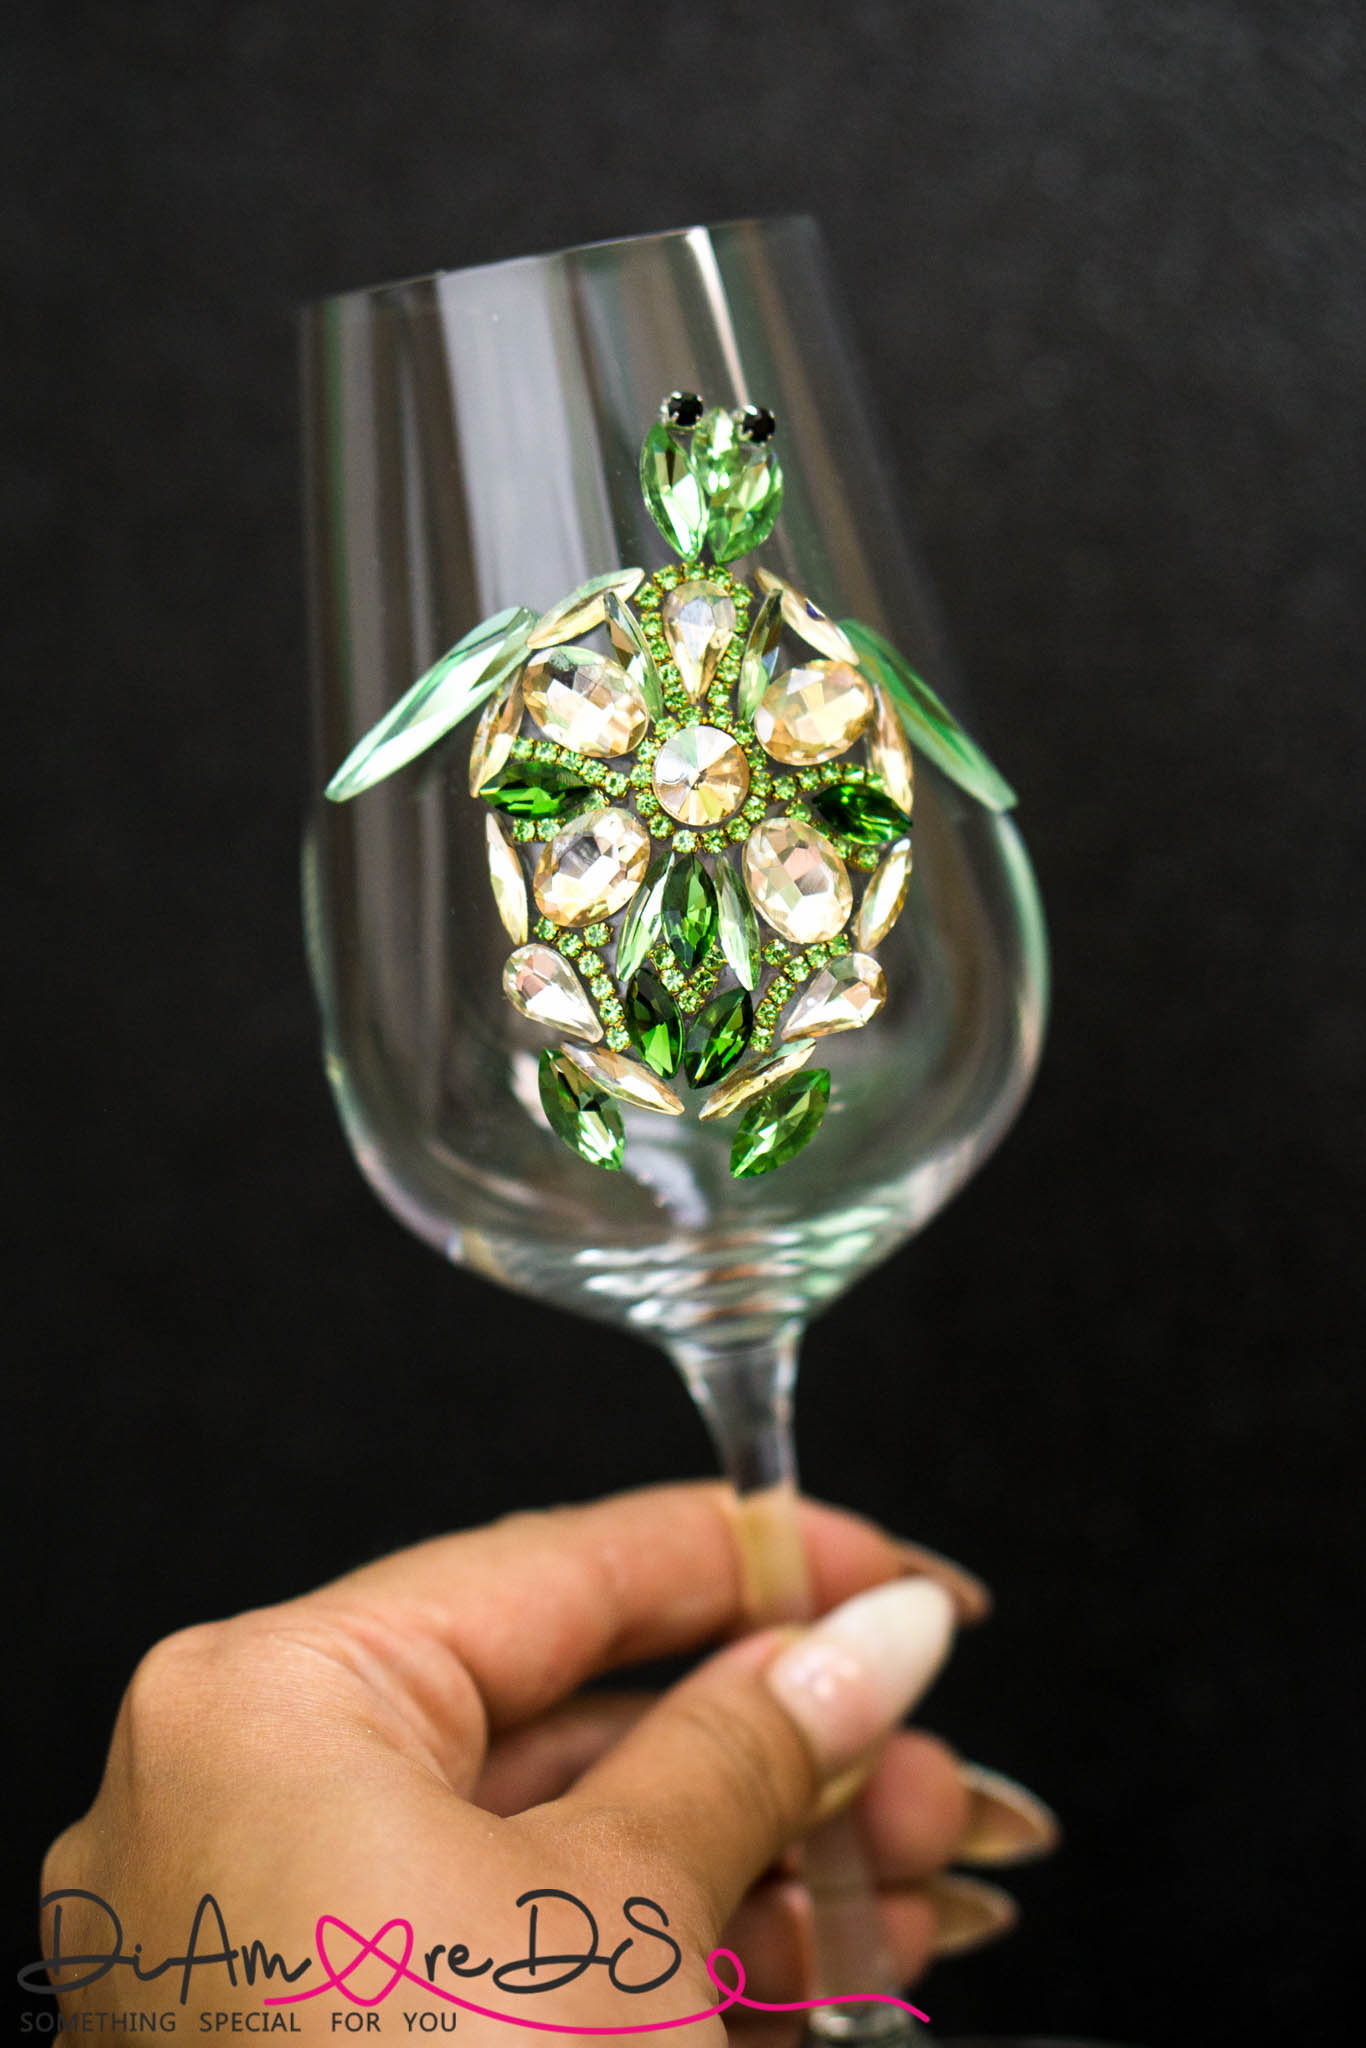 Close-up of a sea turtle-adorned wine glass stem, showcasing intricate crystal work against a dark backdrop.